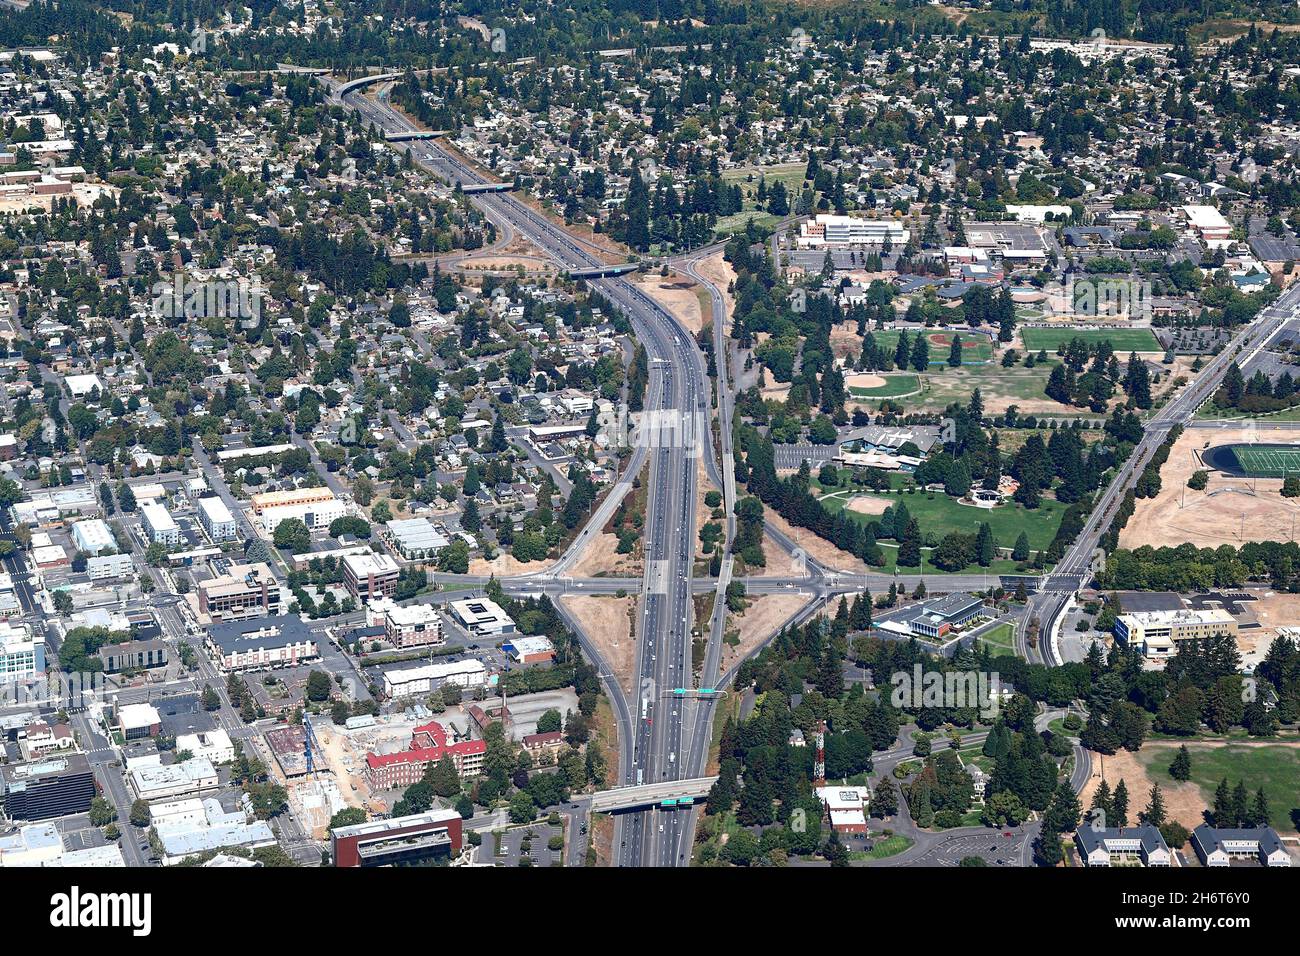 Aerial view of a highway running through a suburban area Stock Photo